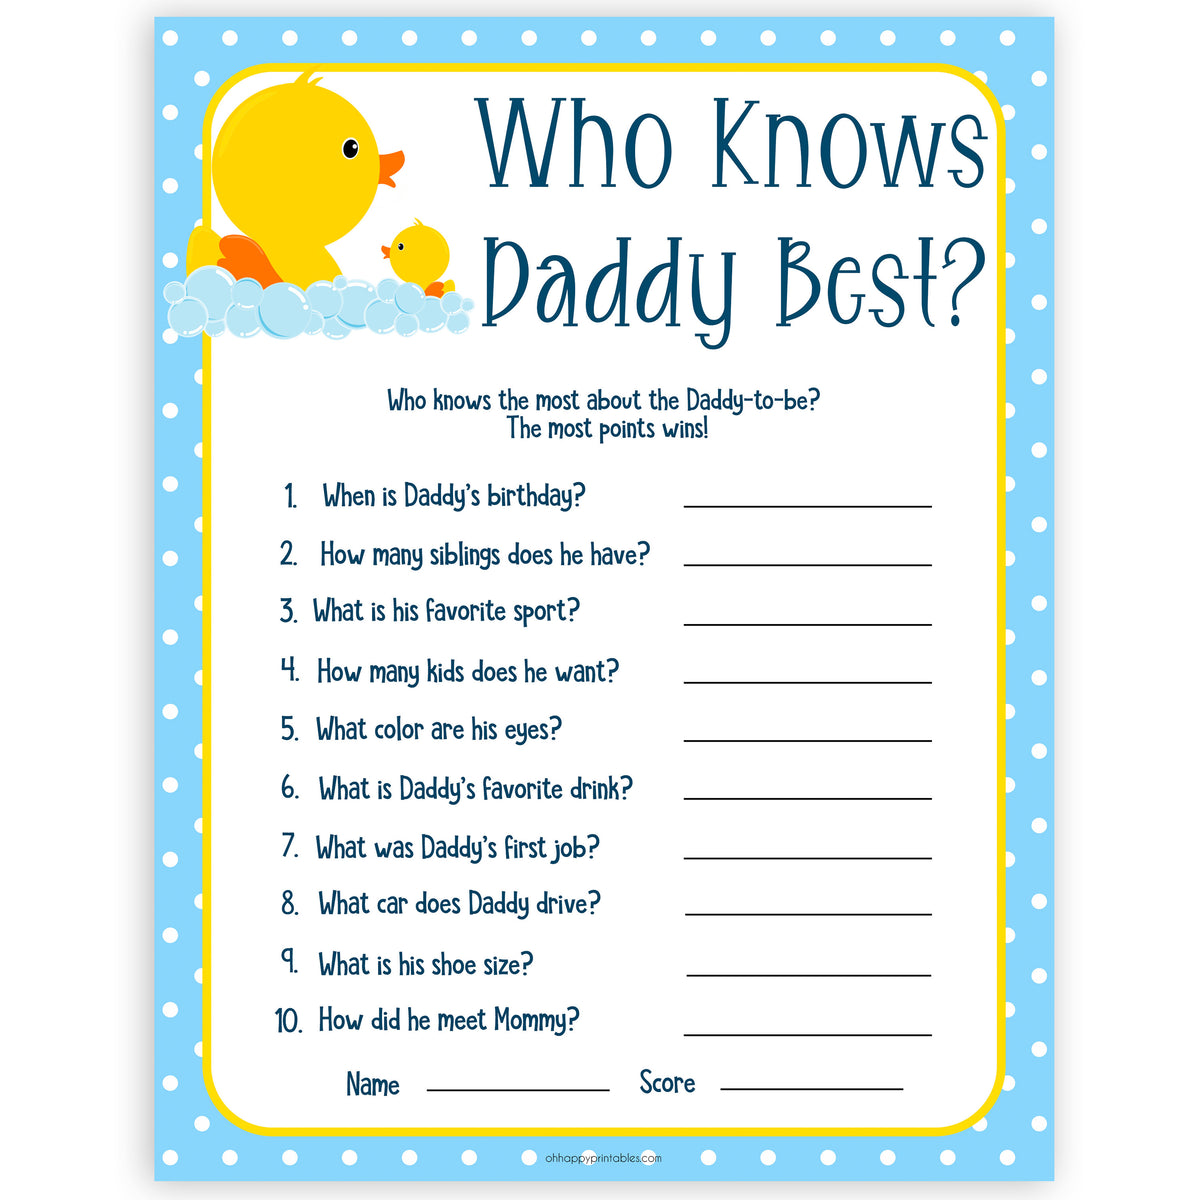 templates-stationery-teddy-who-knows-mommy-best-baby-shower-game